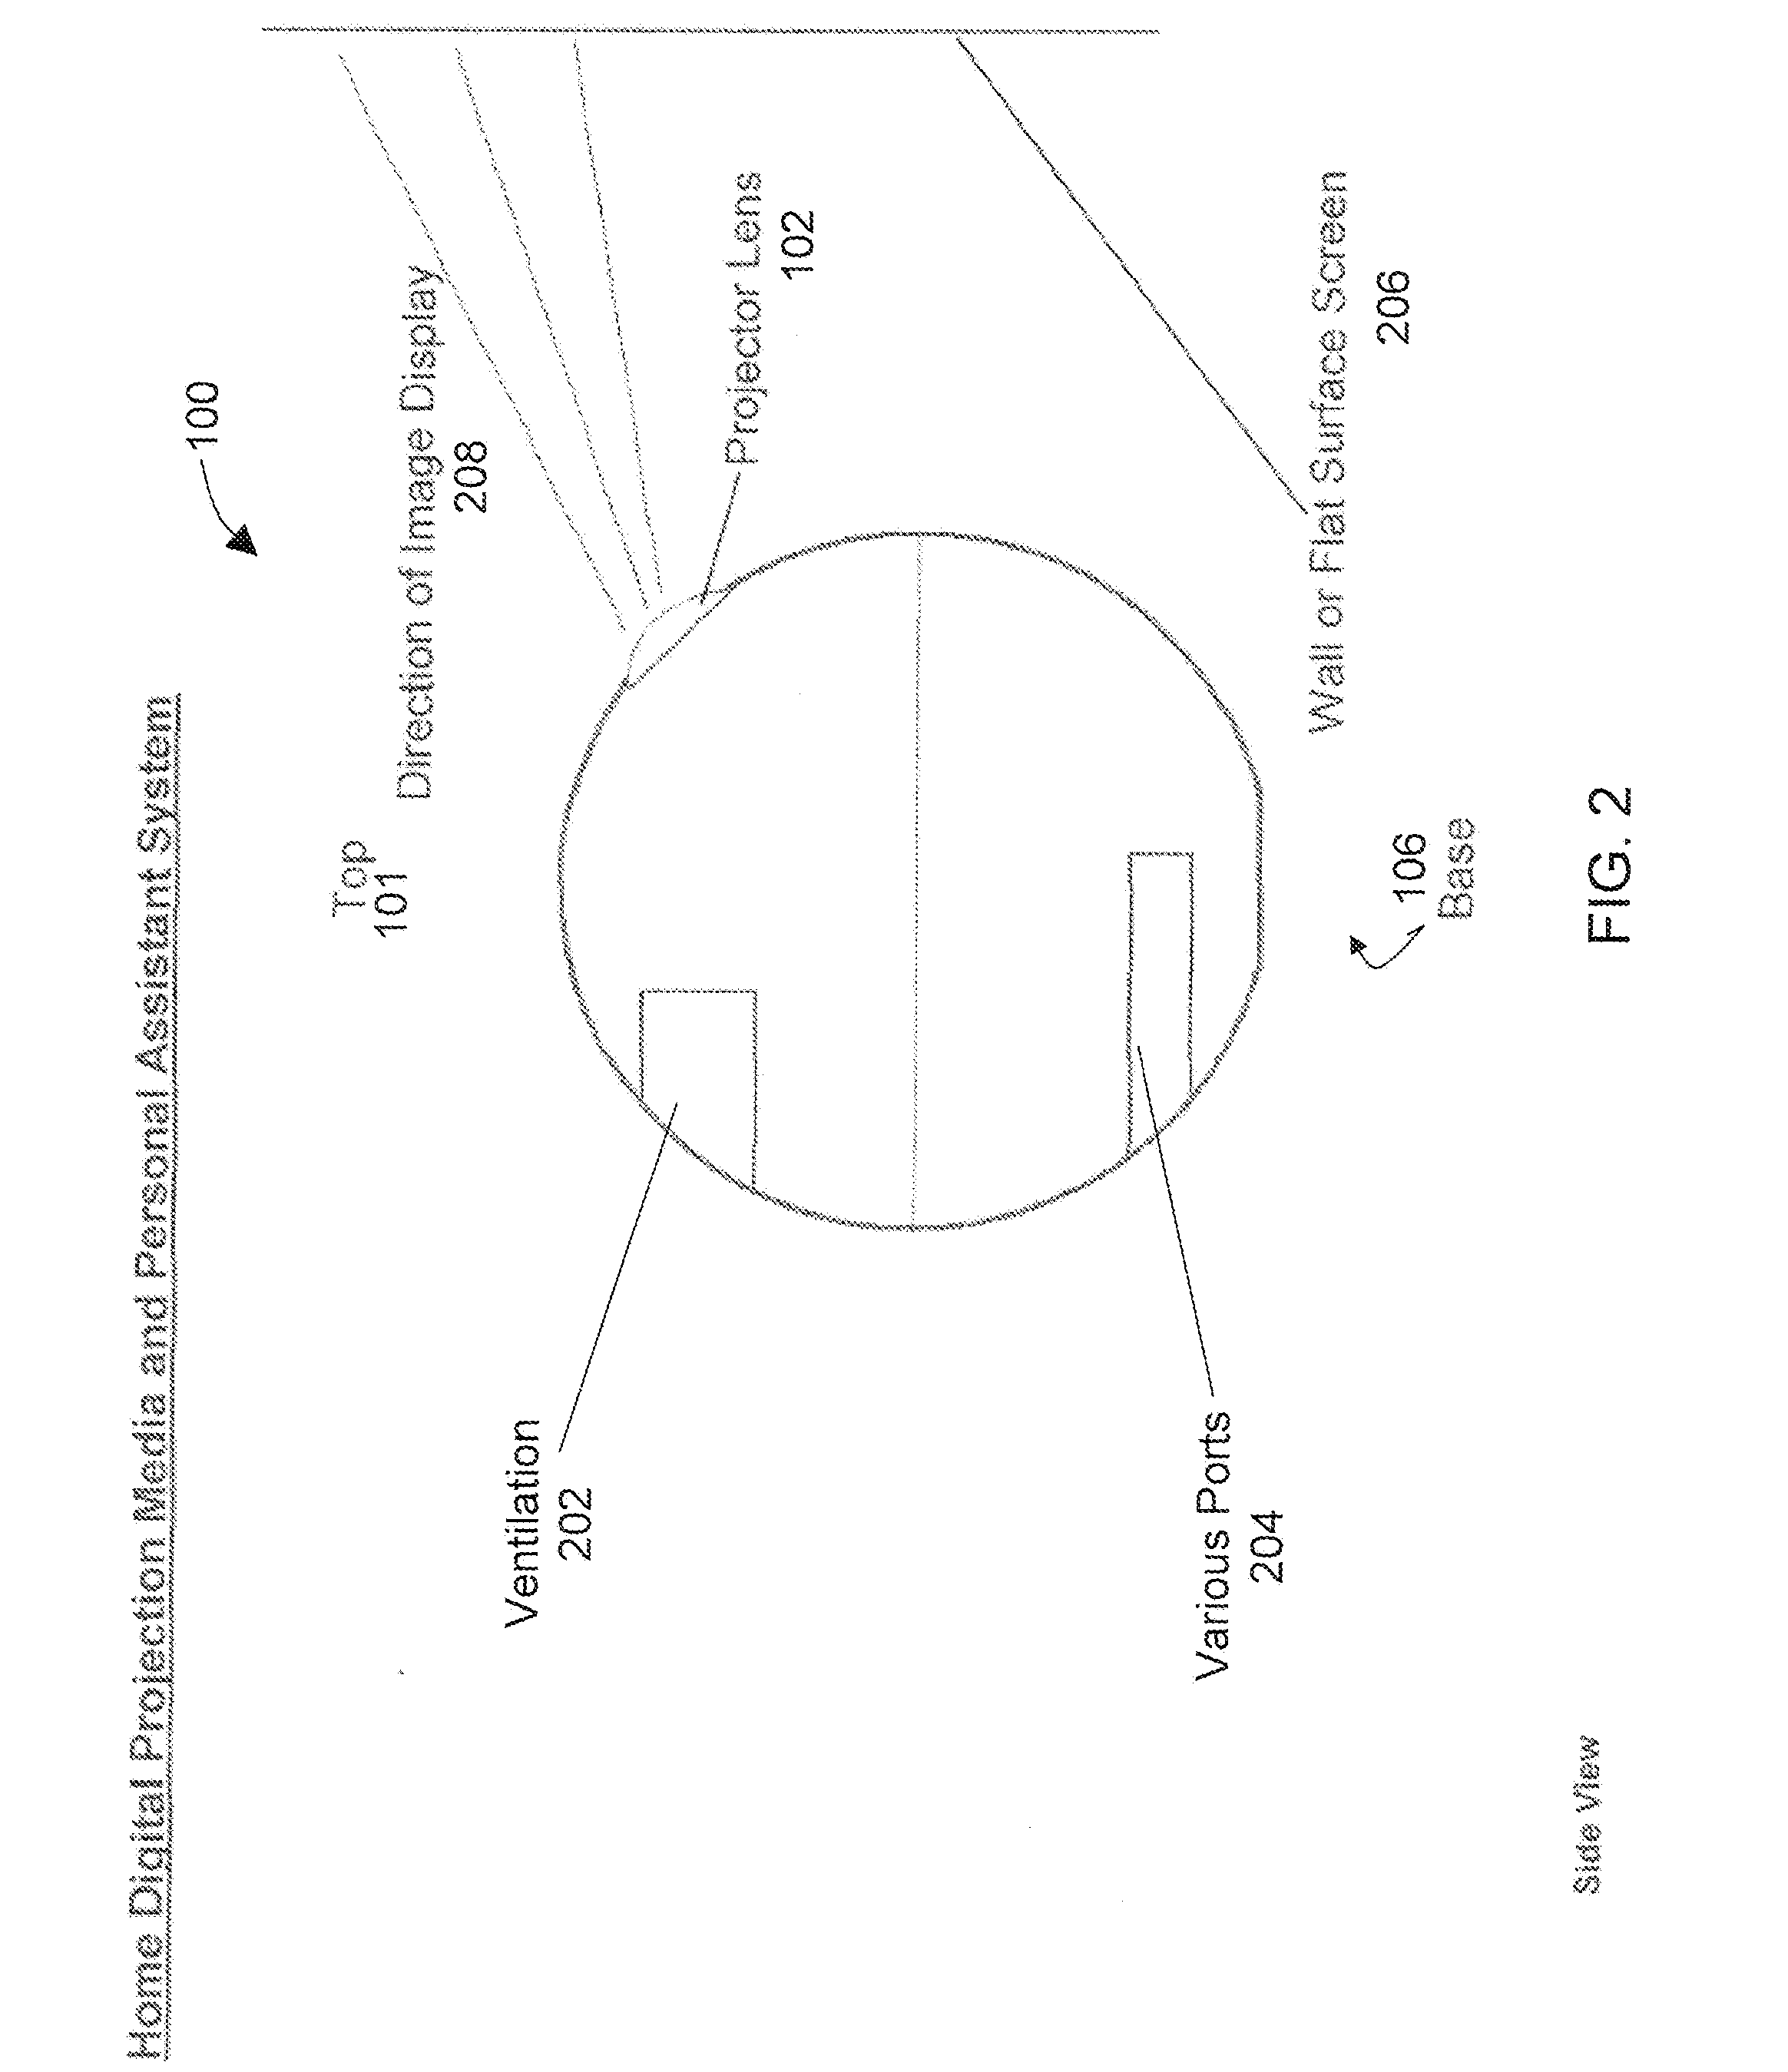 Integrated digital media projection and personal digital data processing system